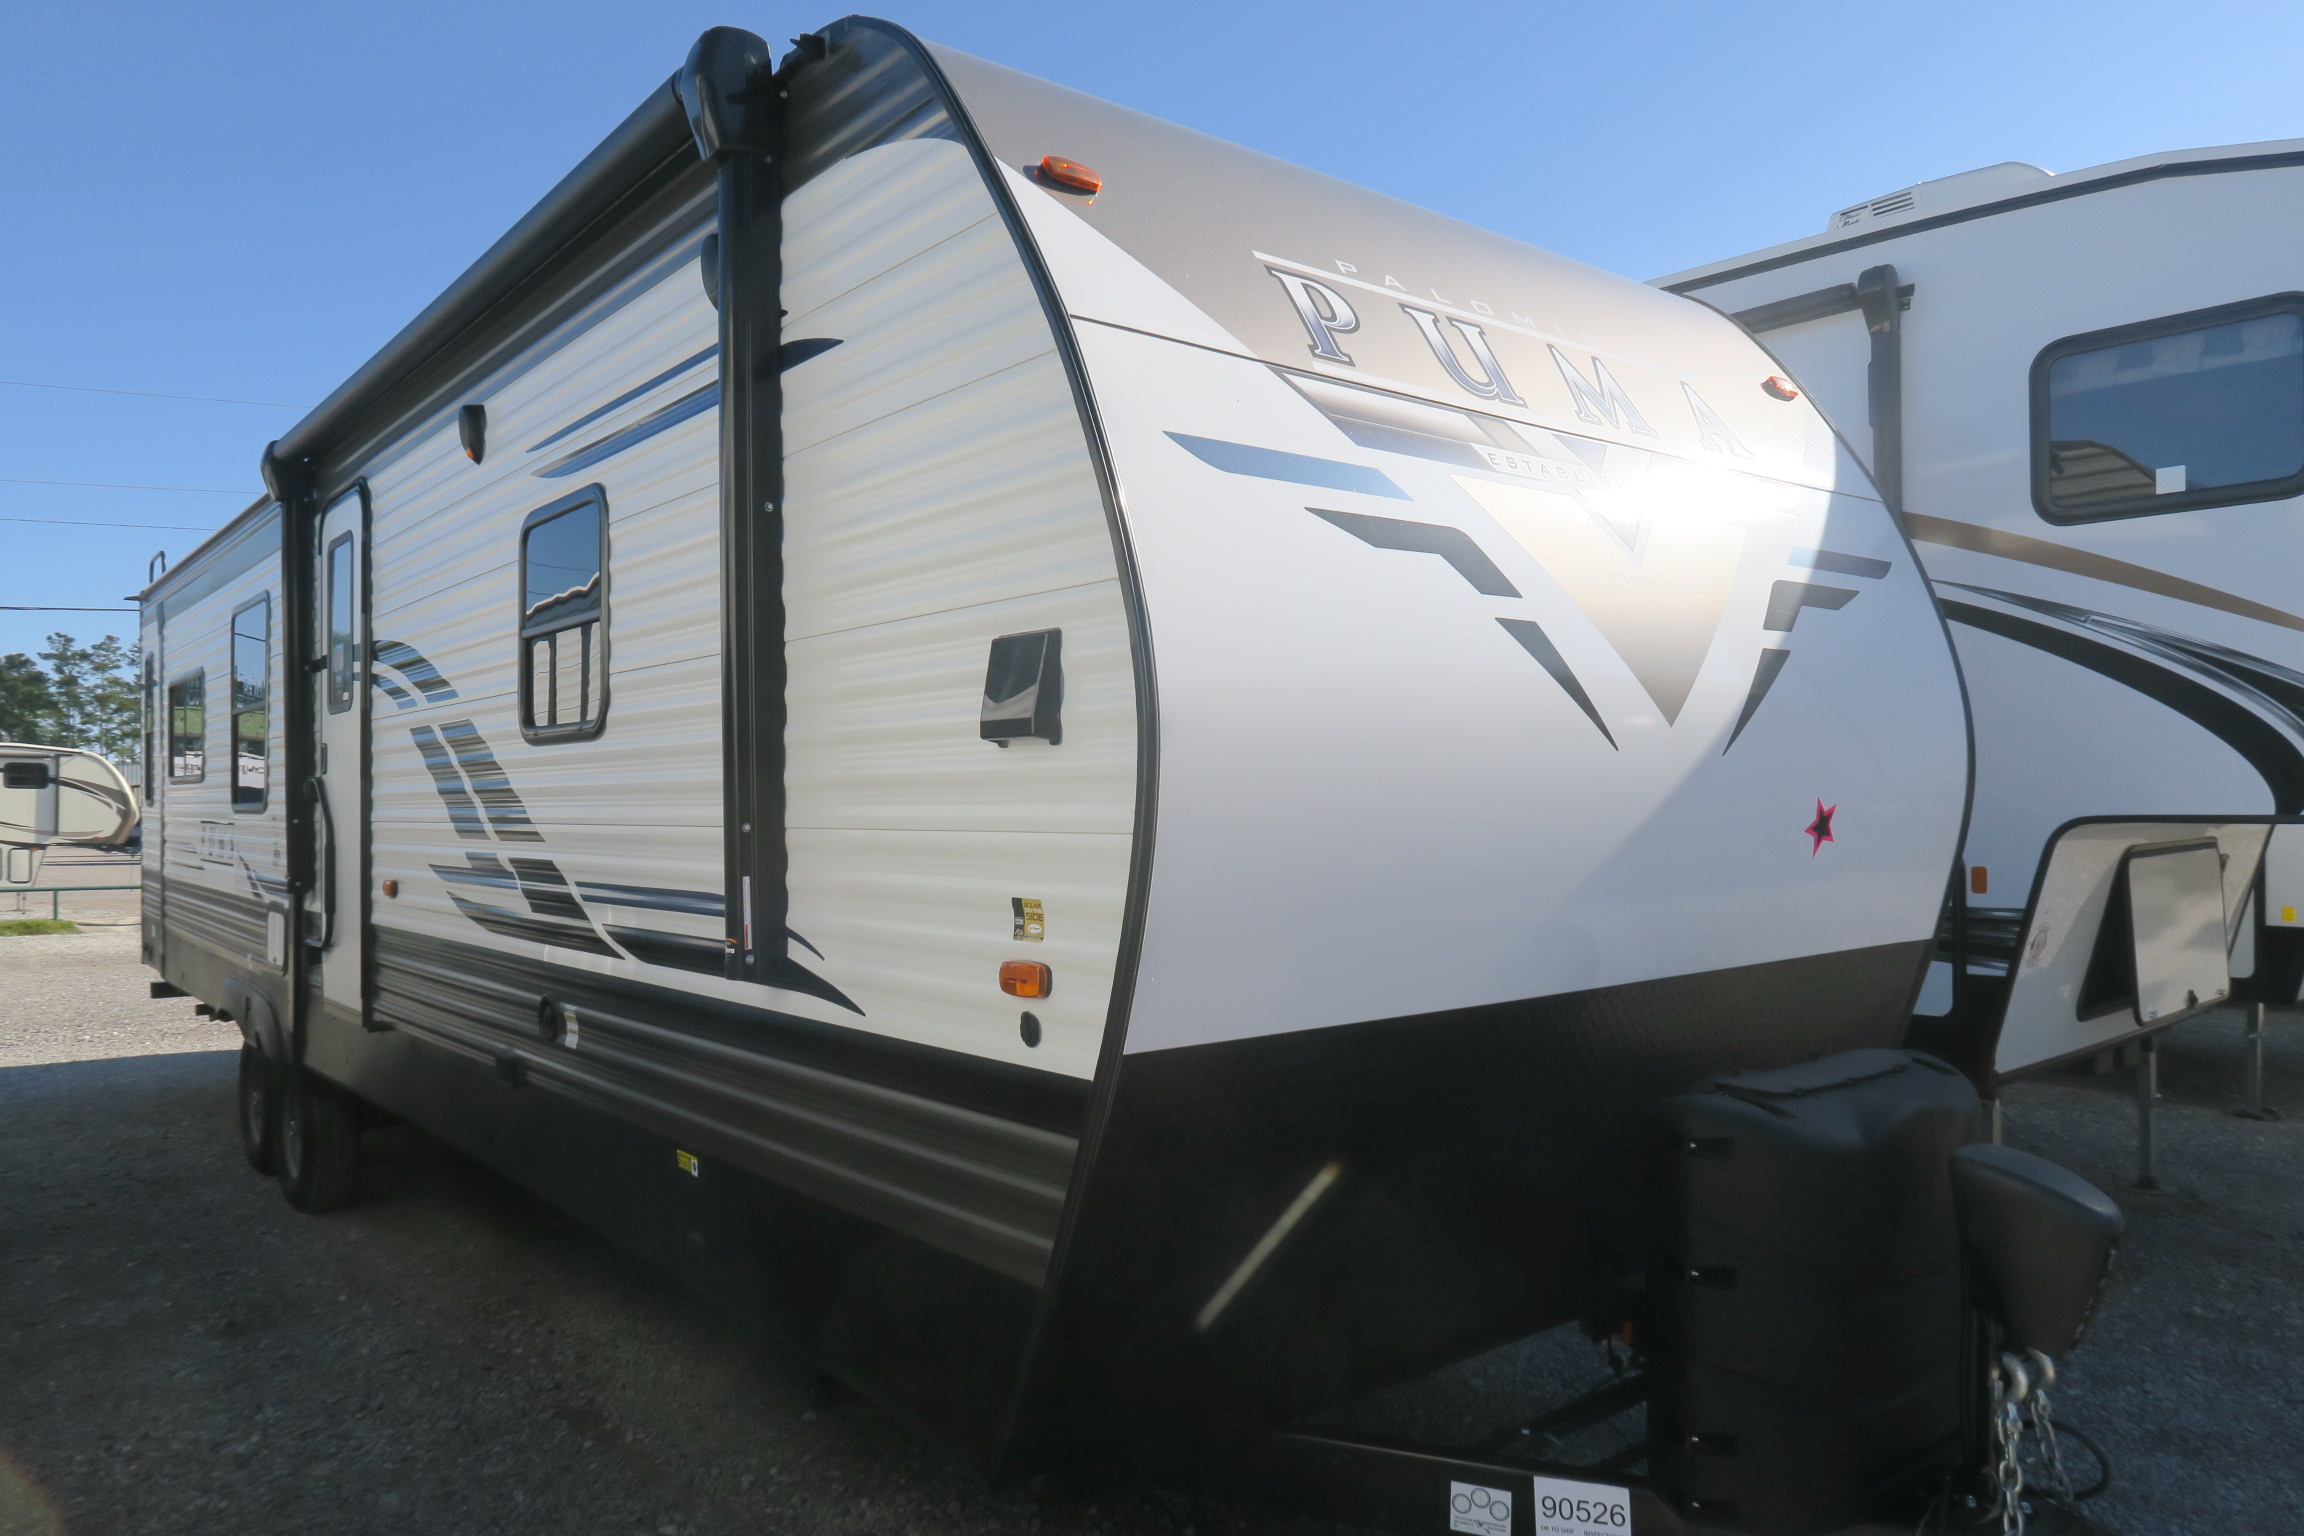 NEW 2021 PUMA 31RLQS - Overview | Berryland Campers 2021 Travel Trailer With Washer And Dryer